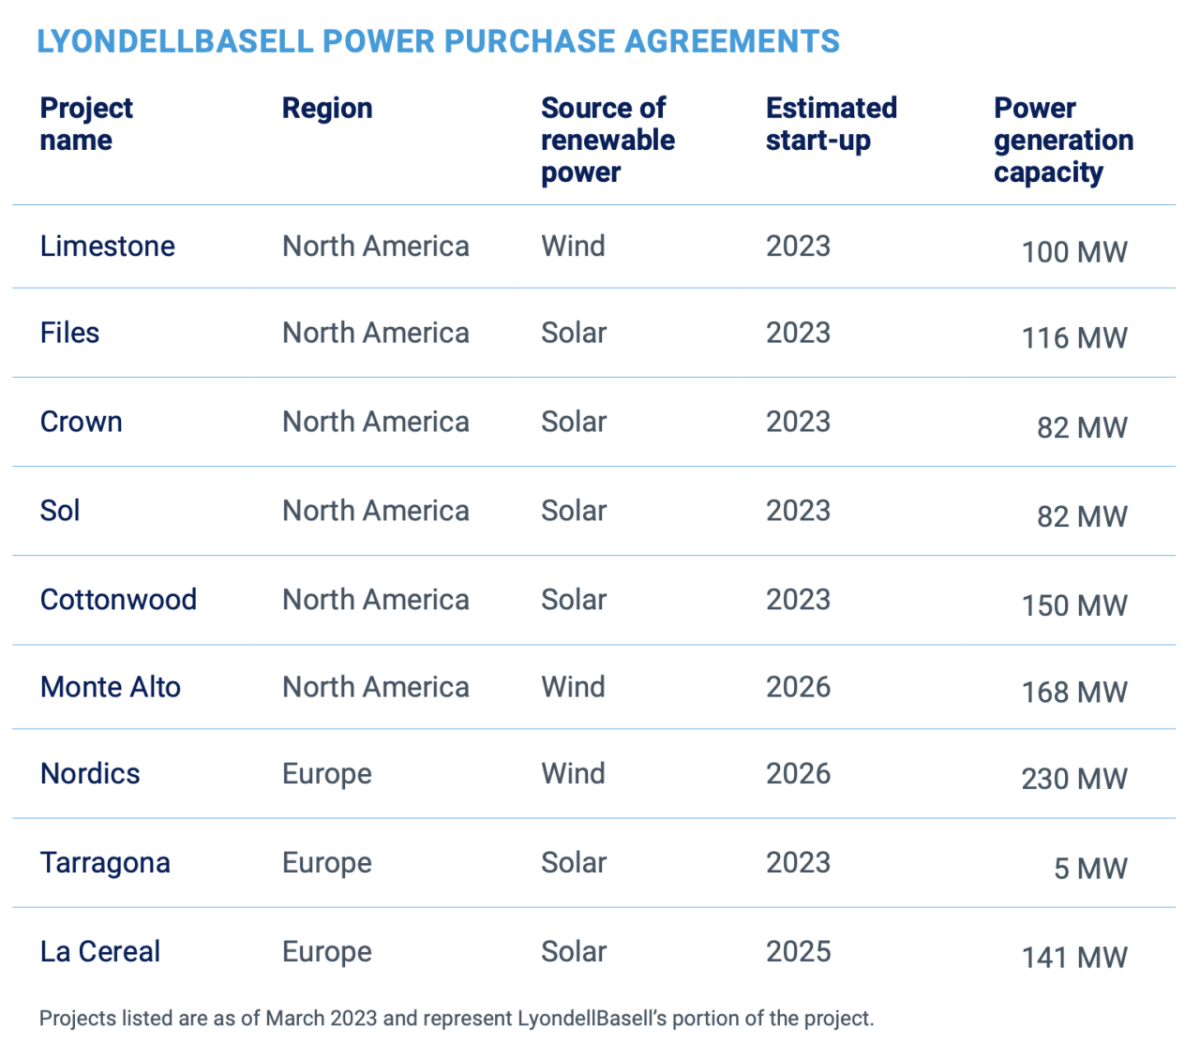 LYONDELLBASELL POWER PURCHASE AGREEMENTS